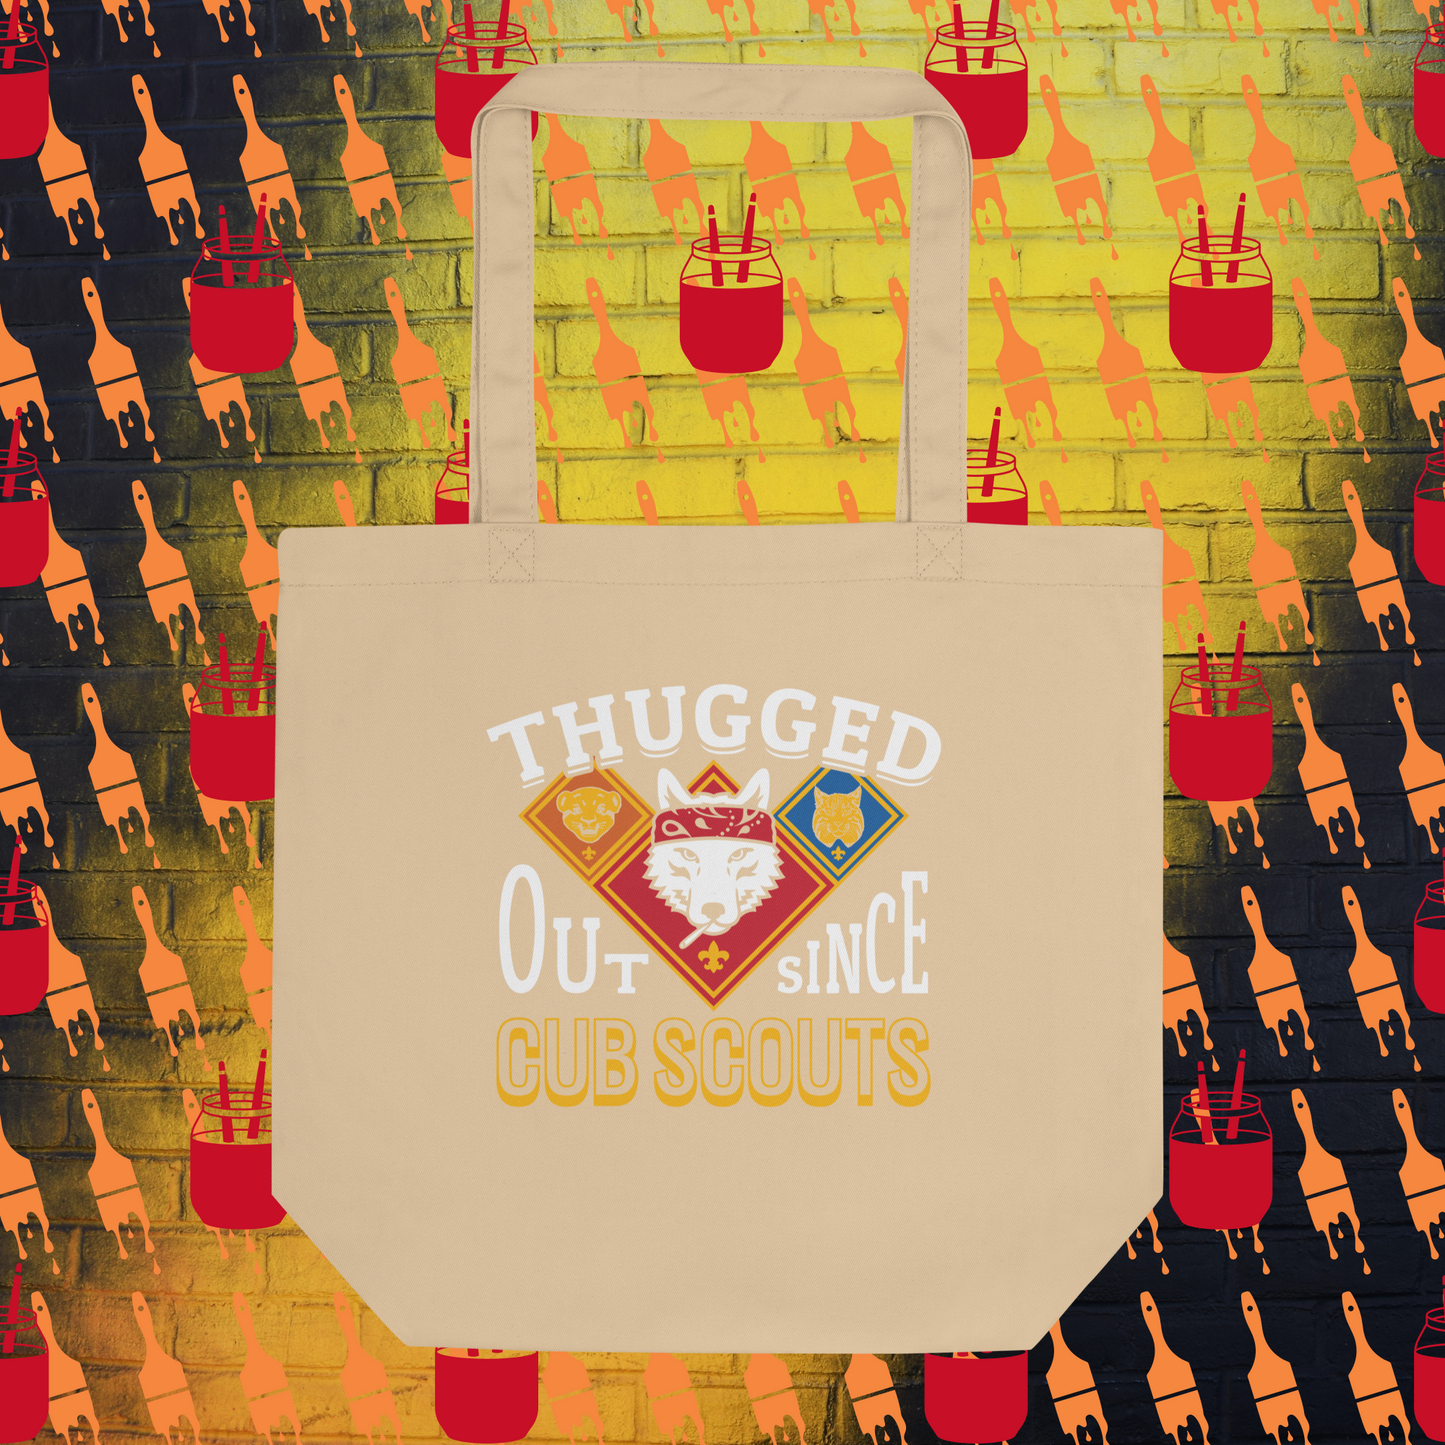 Thugged Out Since Cub Scouts- Art Bag